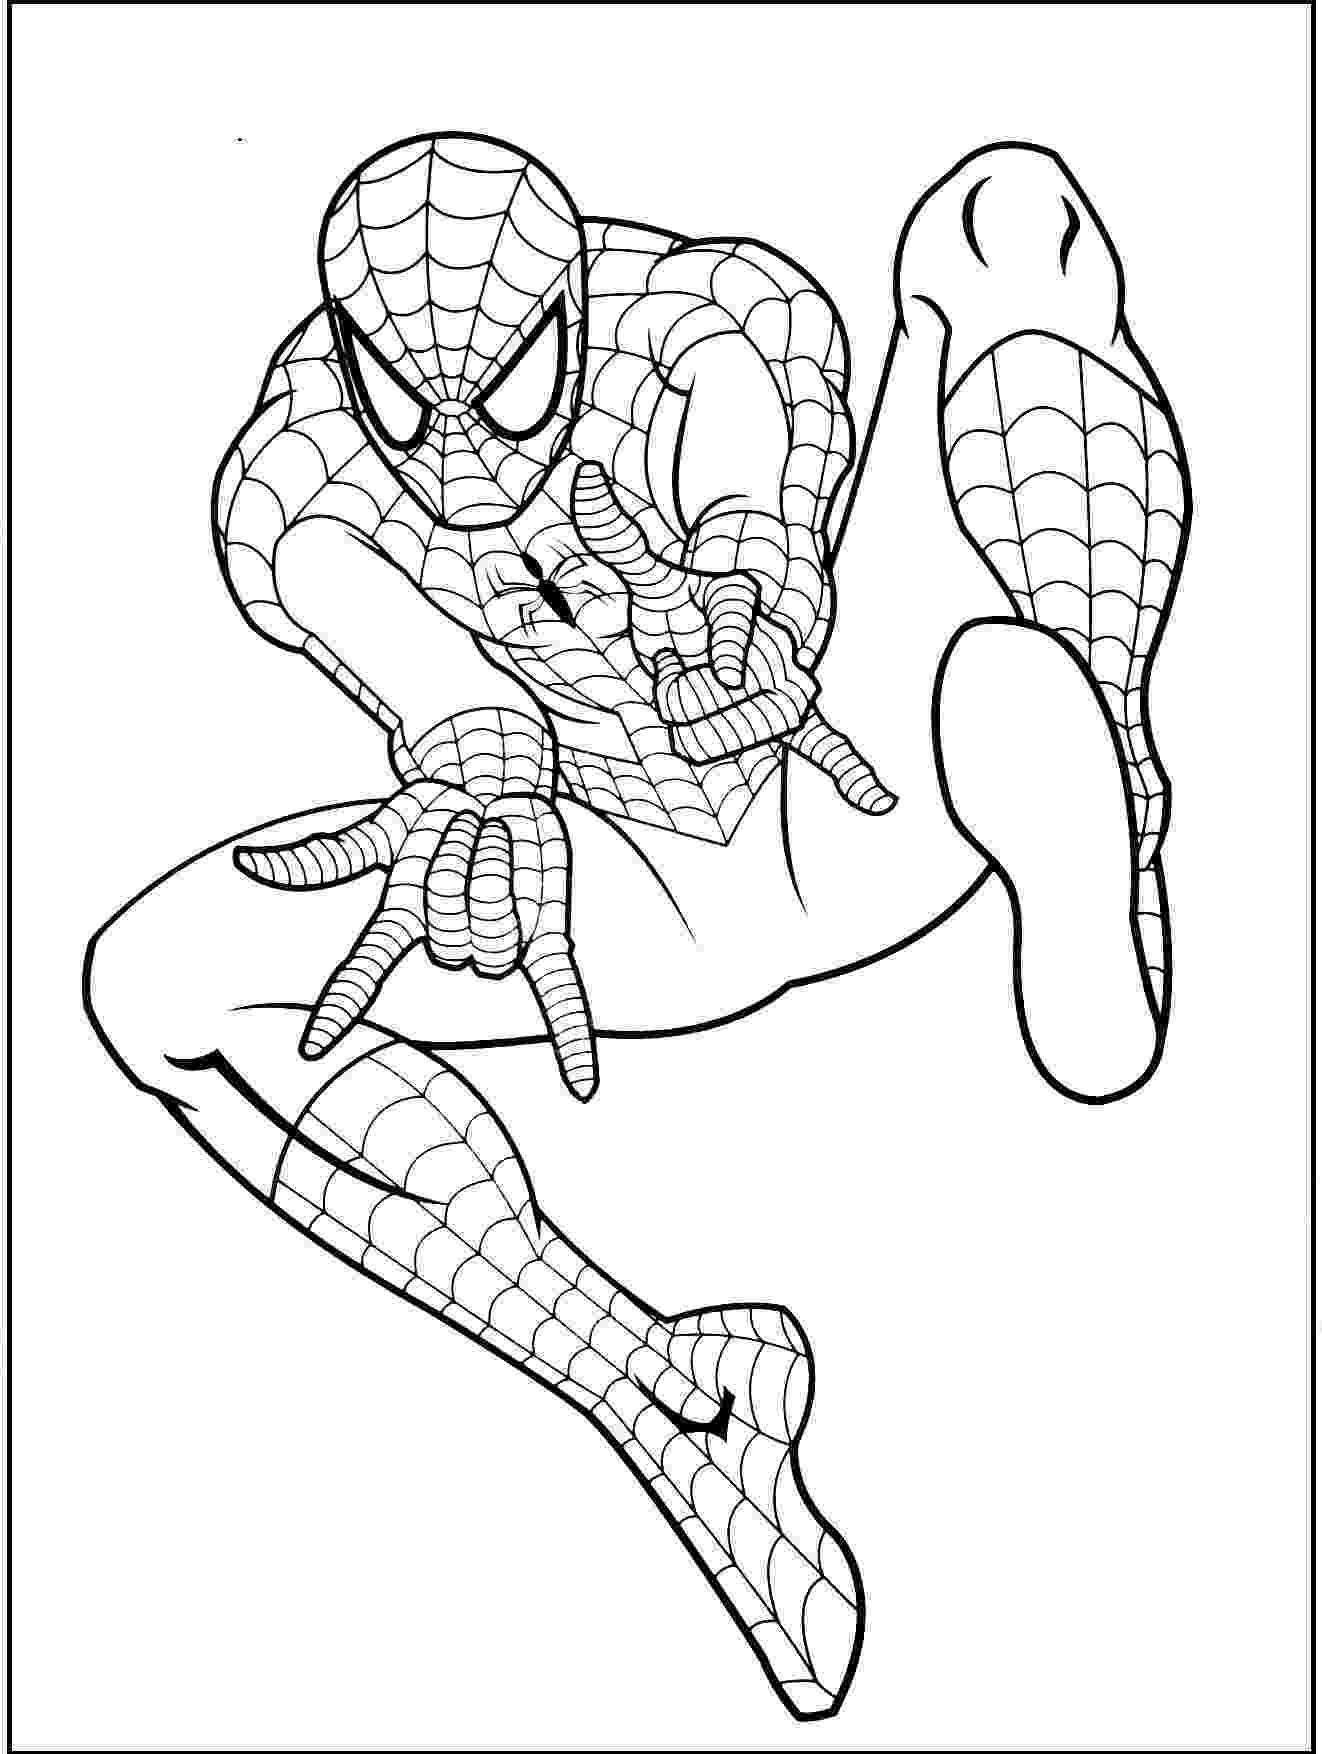 spider man coloring sheet spider man coloring pages print and colorcom coloring spider sheet man 